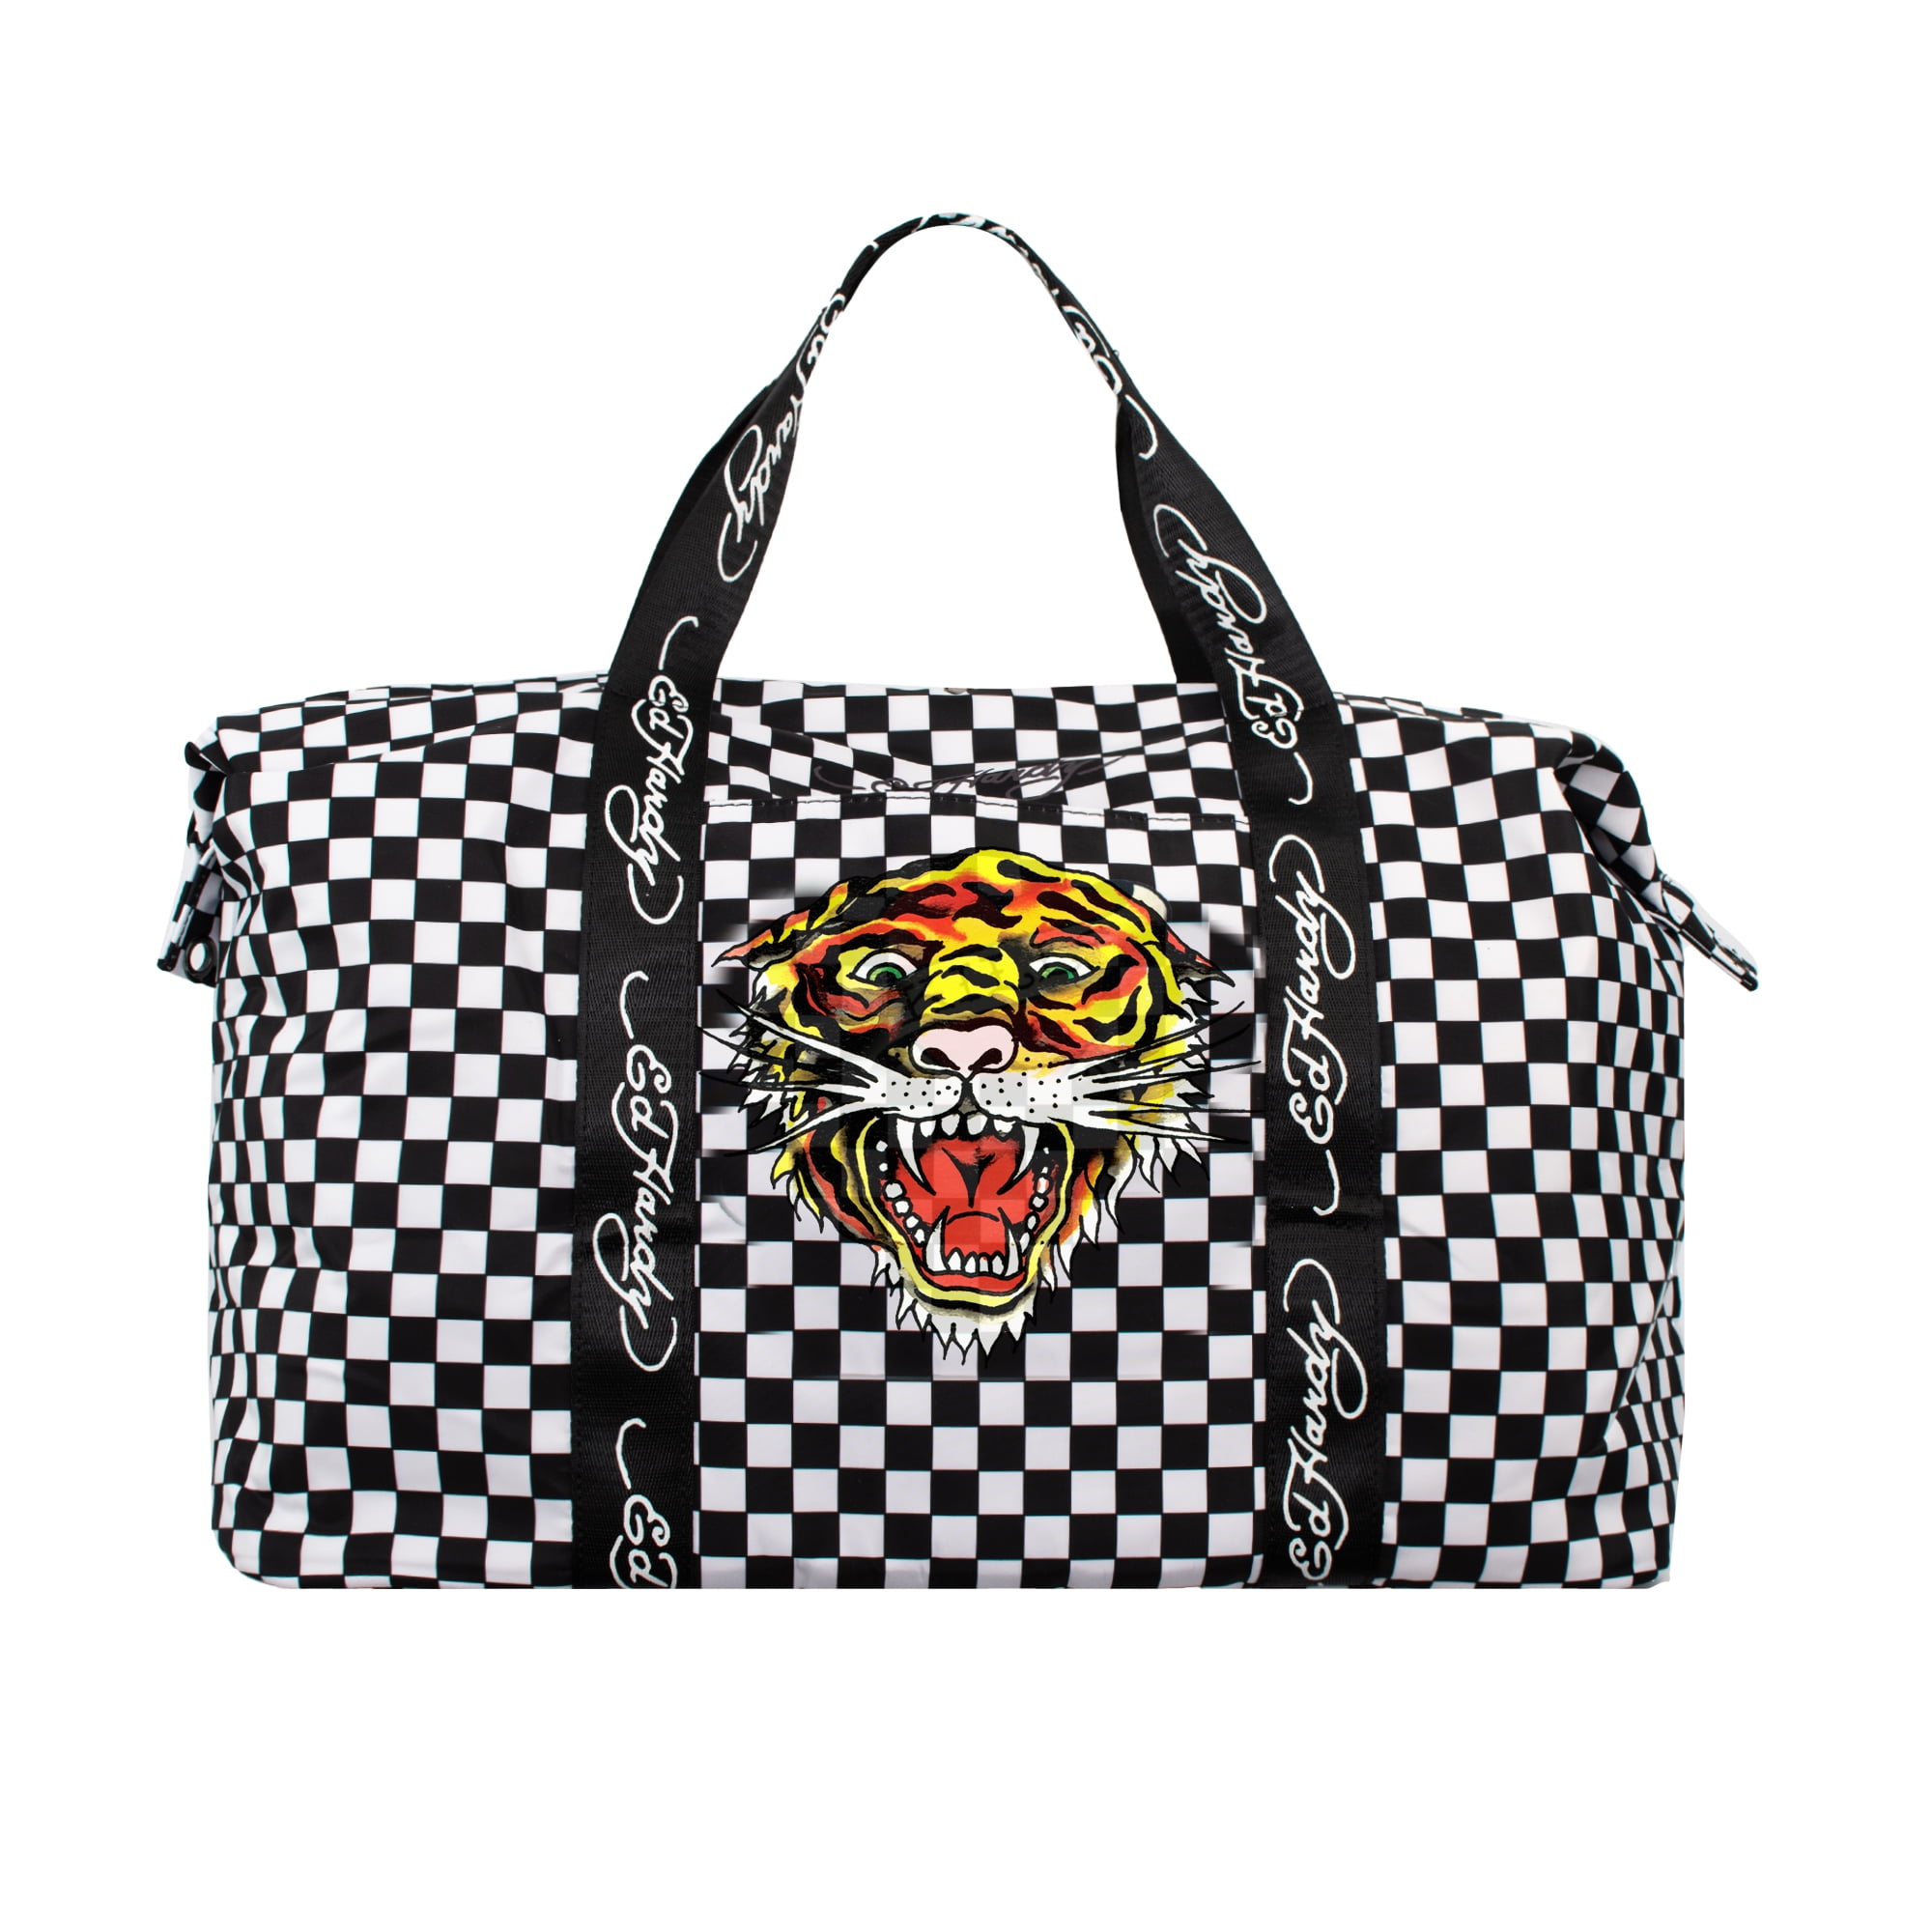 Authentic Ed Hardy Bag. ( Check the last slide for the slight tearing on  the handles. ) Price: 270 Dh | Instagram